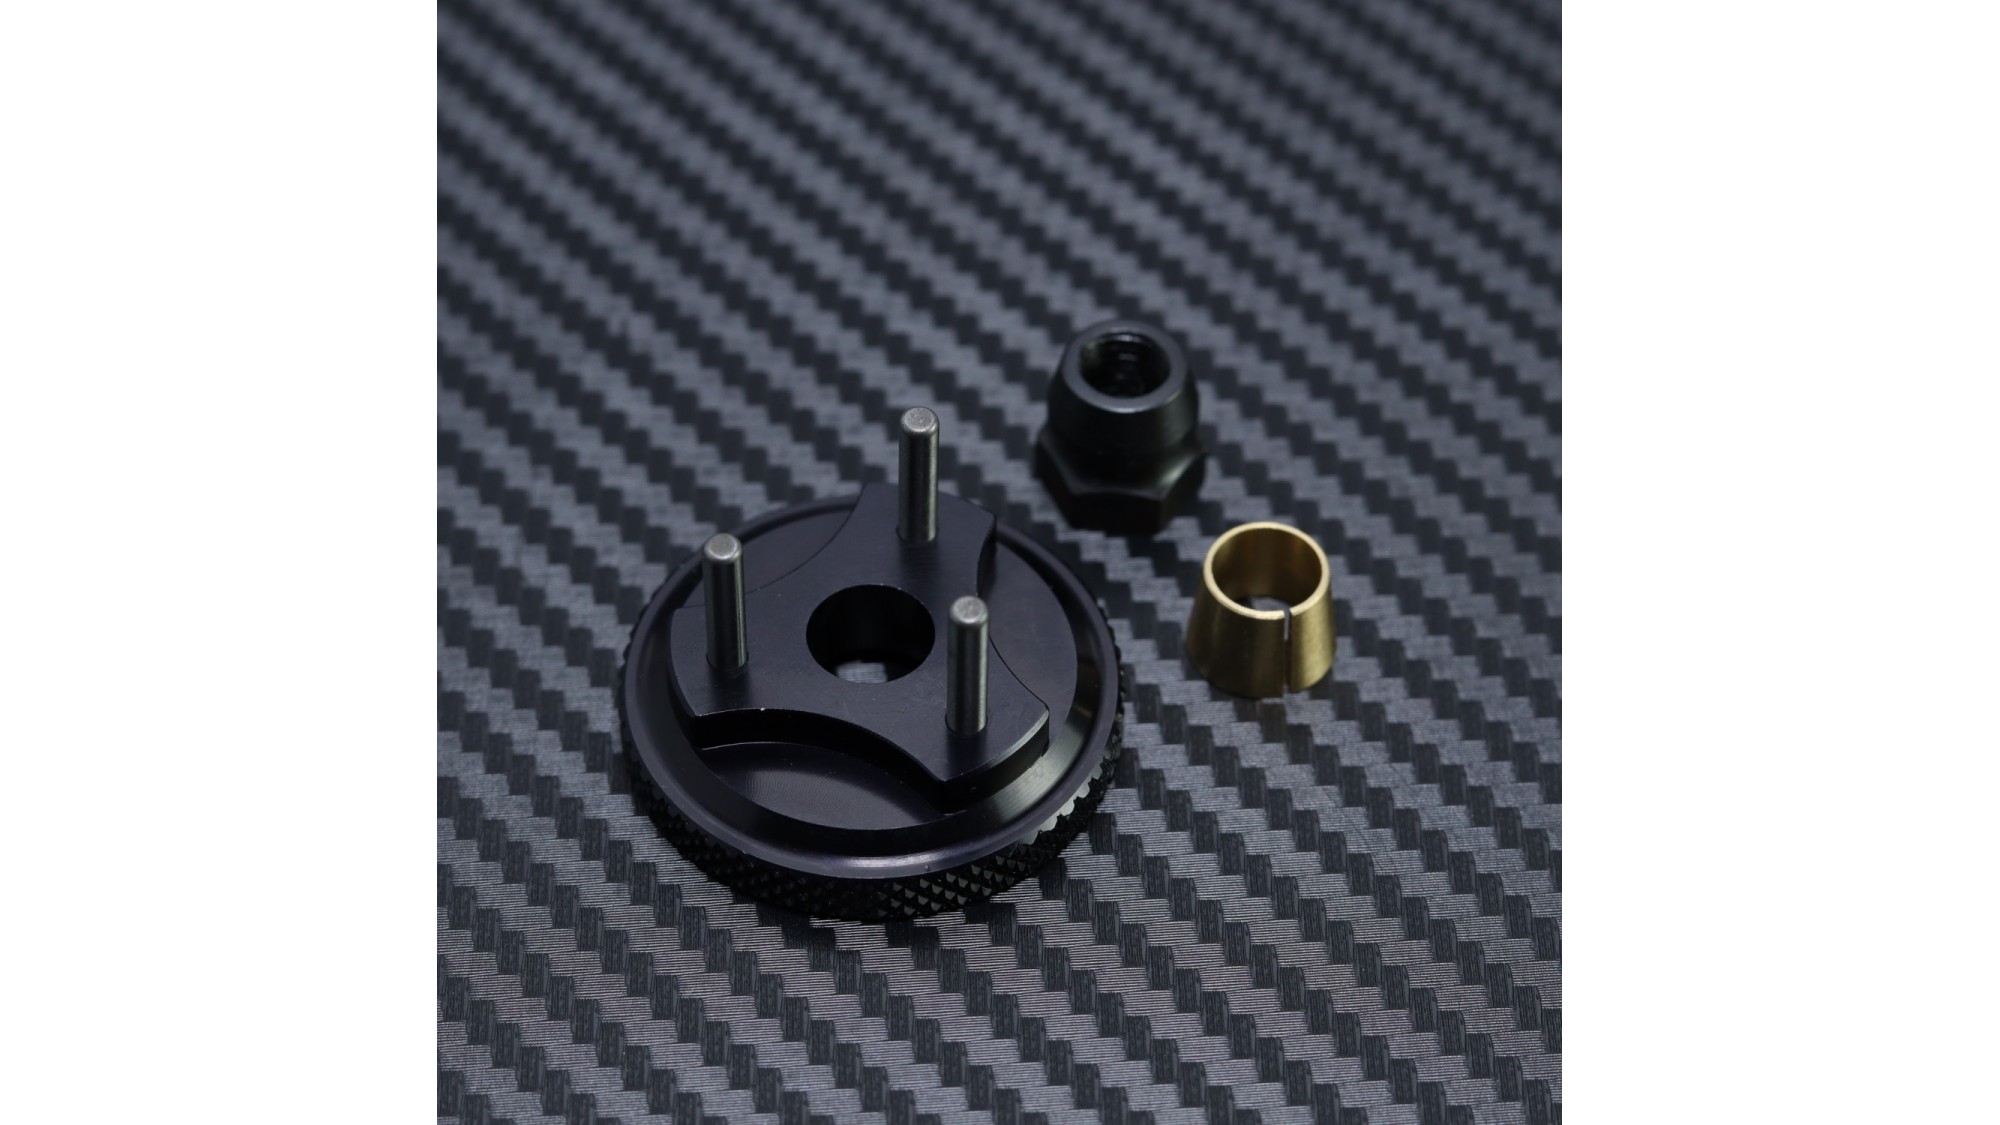 [MYB0079] 3-Shoe Flywheel with Nut and Collet for Mayako MX8 (-21)